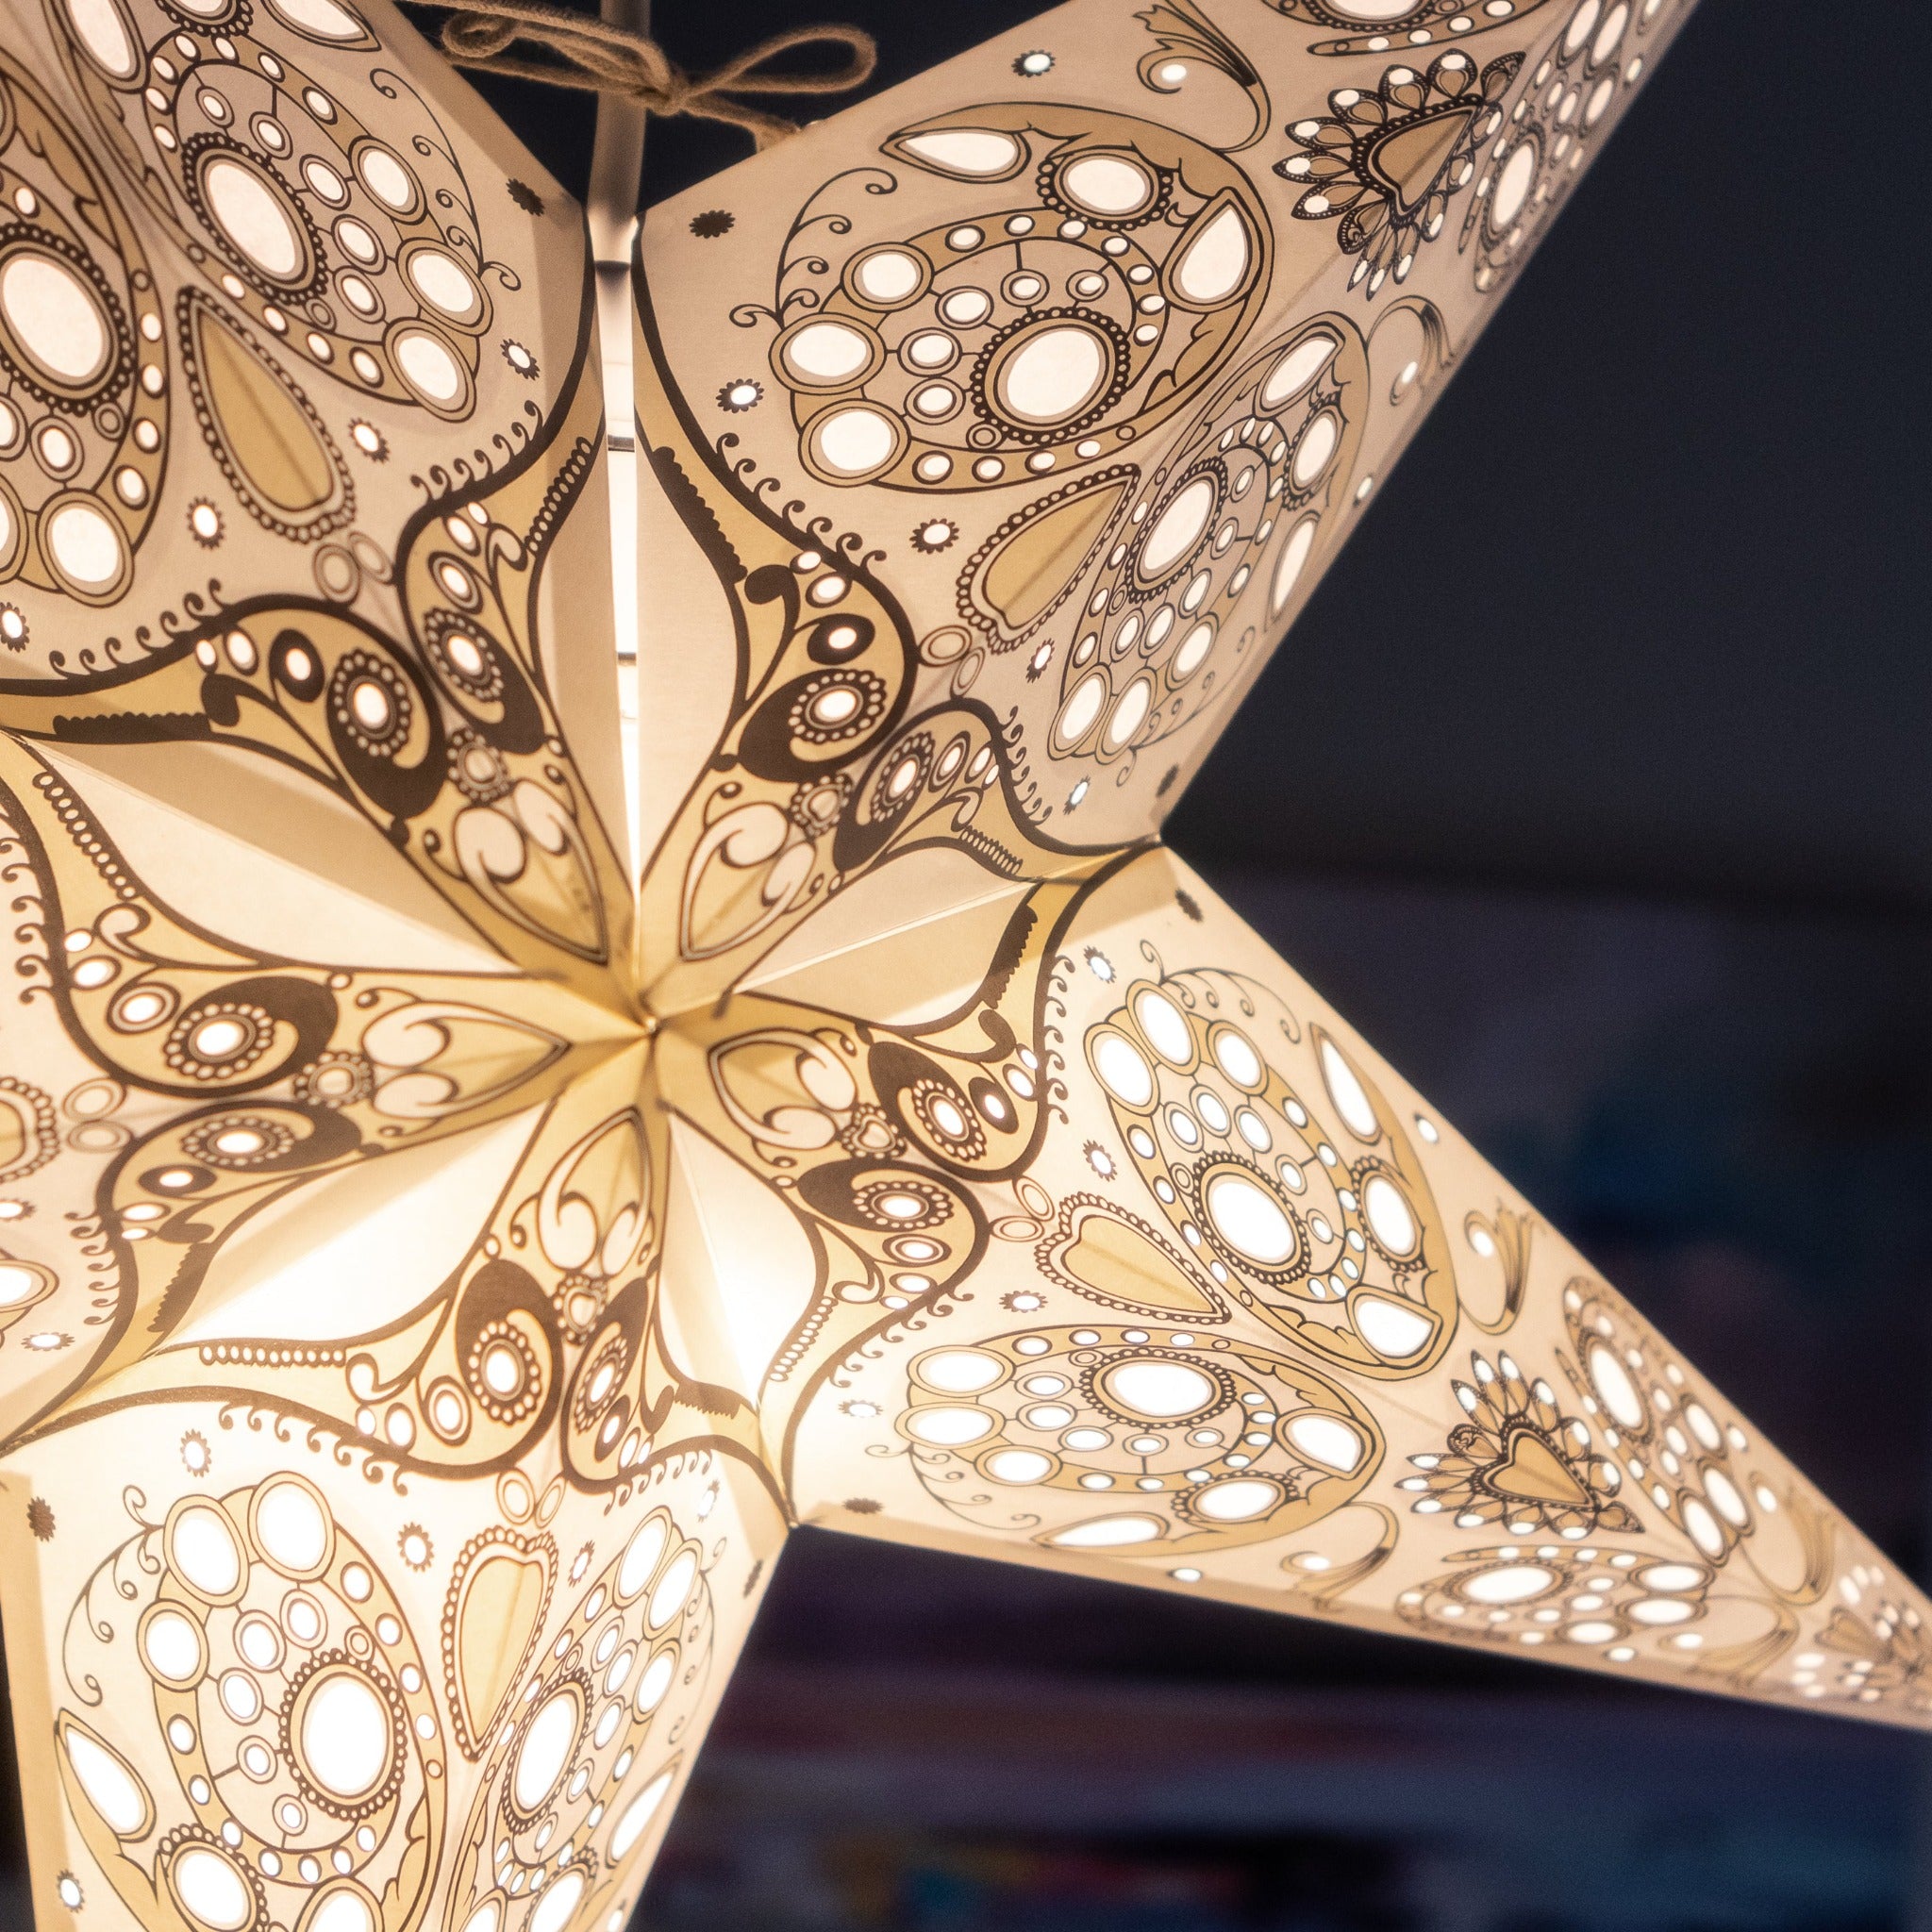 Scandi Christmas Star Lights and decorations  white patterned star